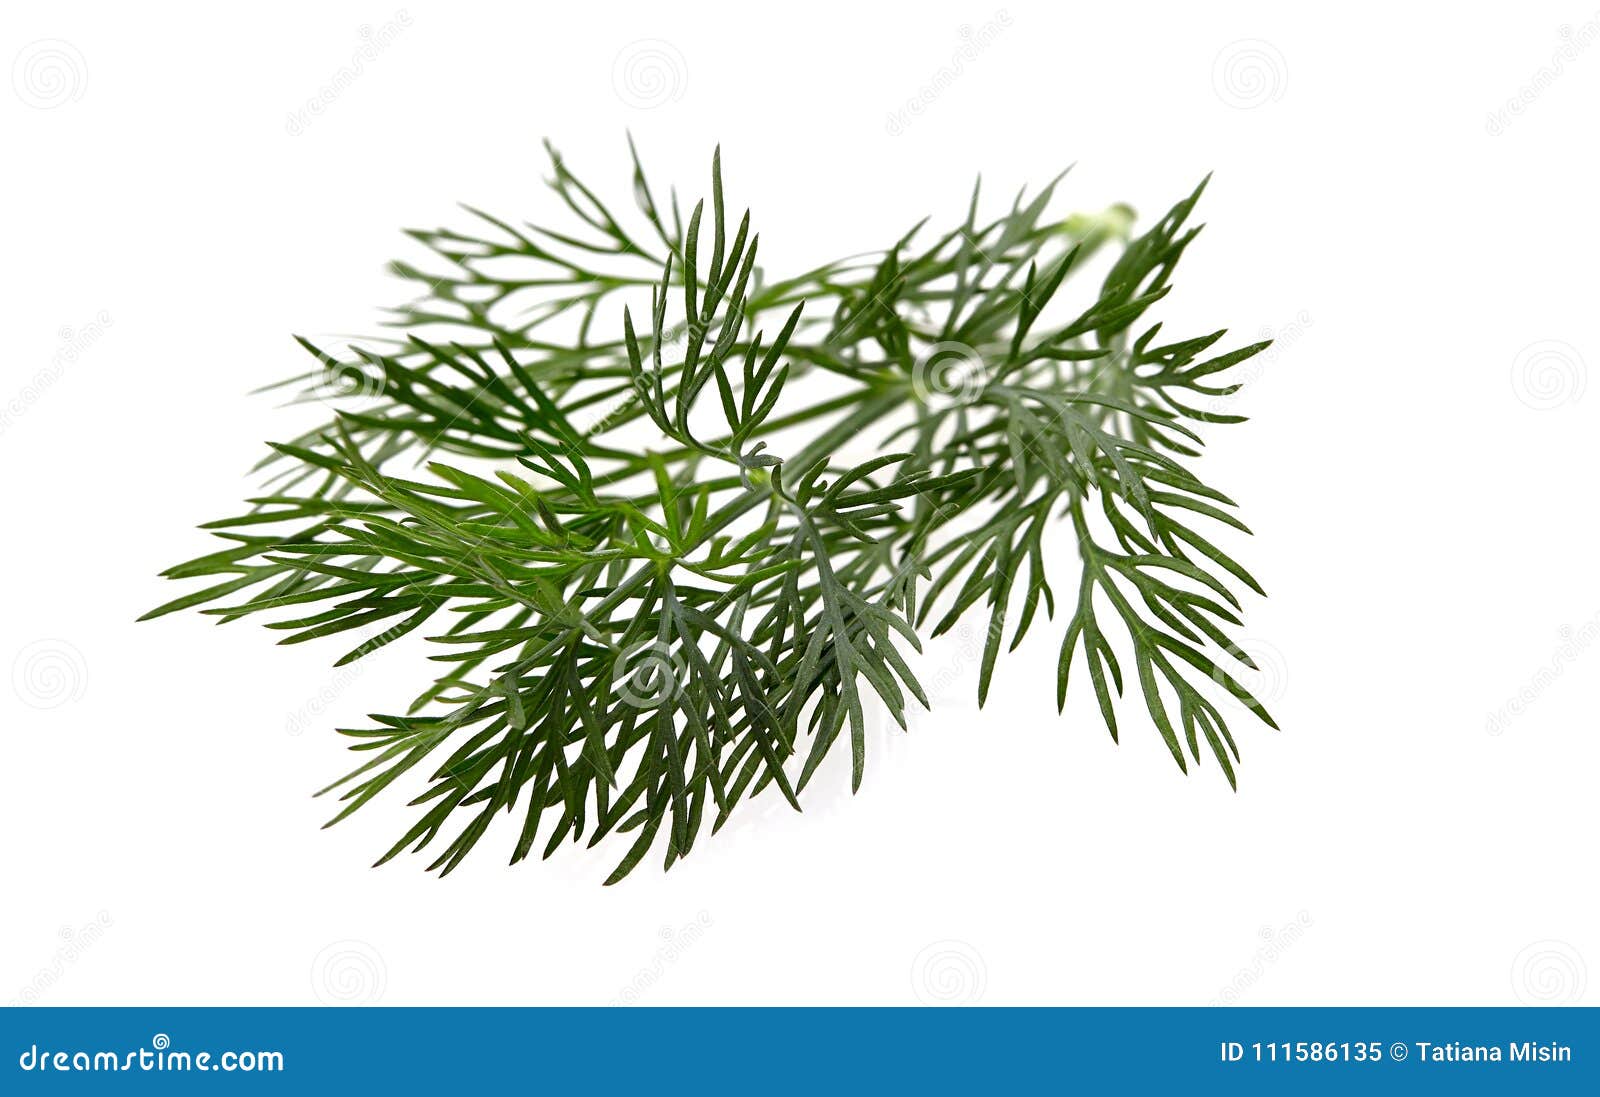 fresh dill on wite background